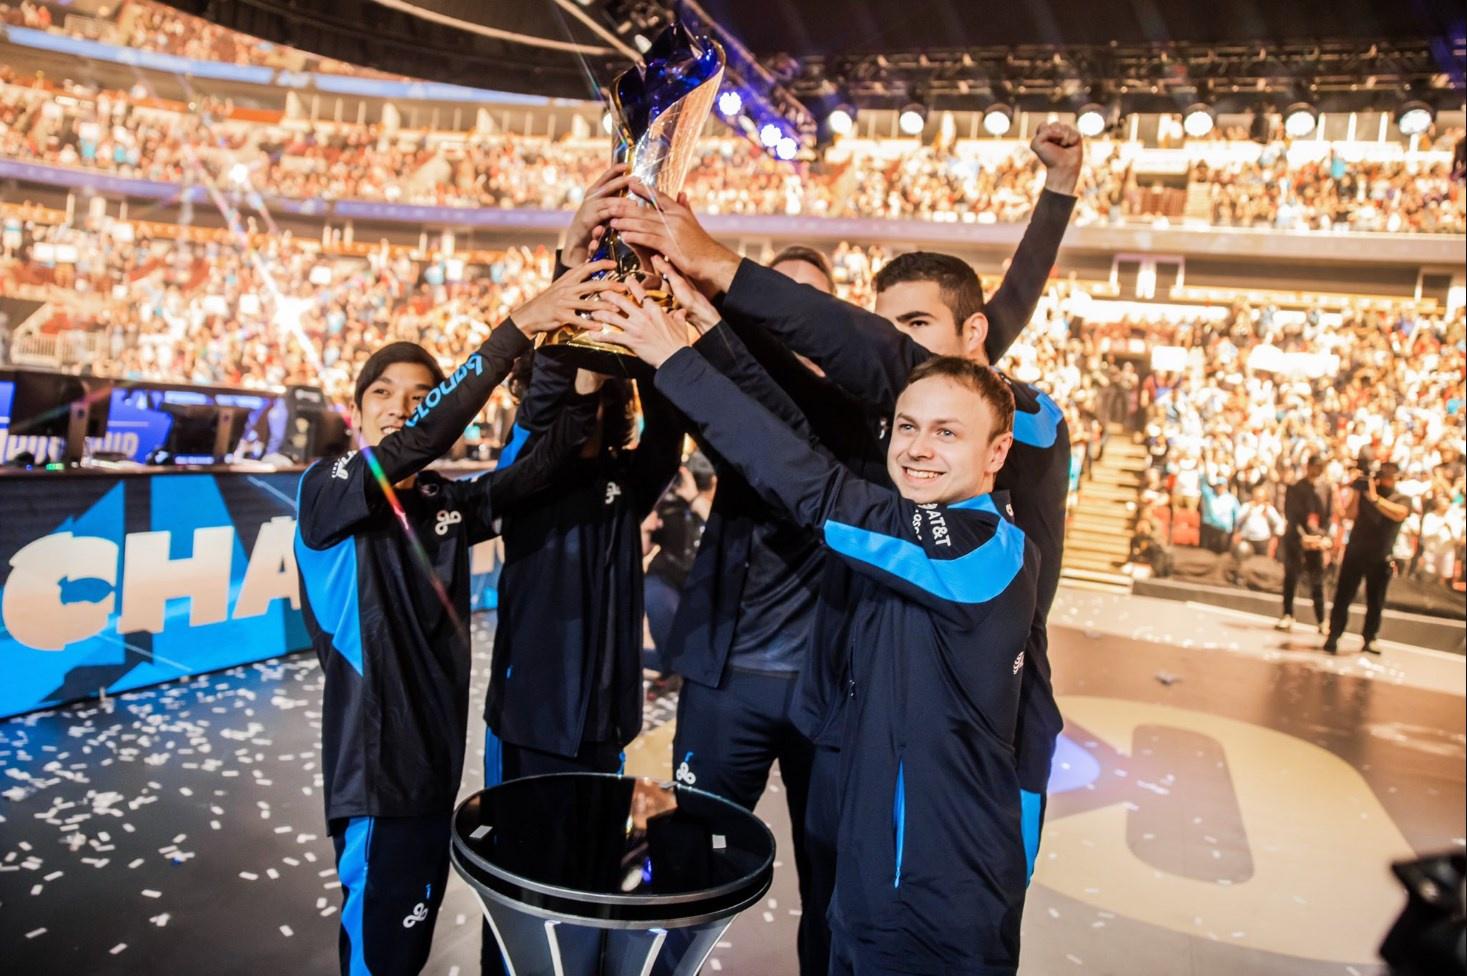 Cloud9 sweep 100 Thieves, take home the 2022 LCS Championship